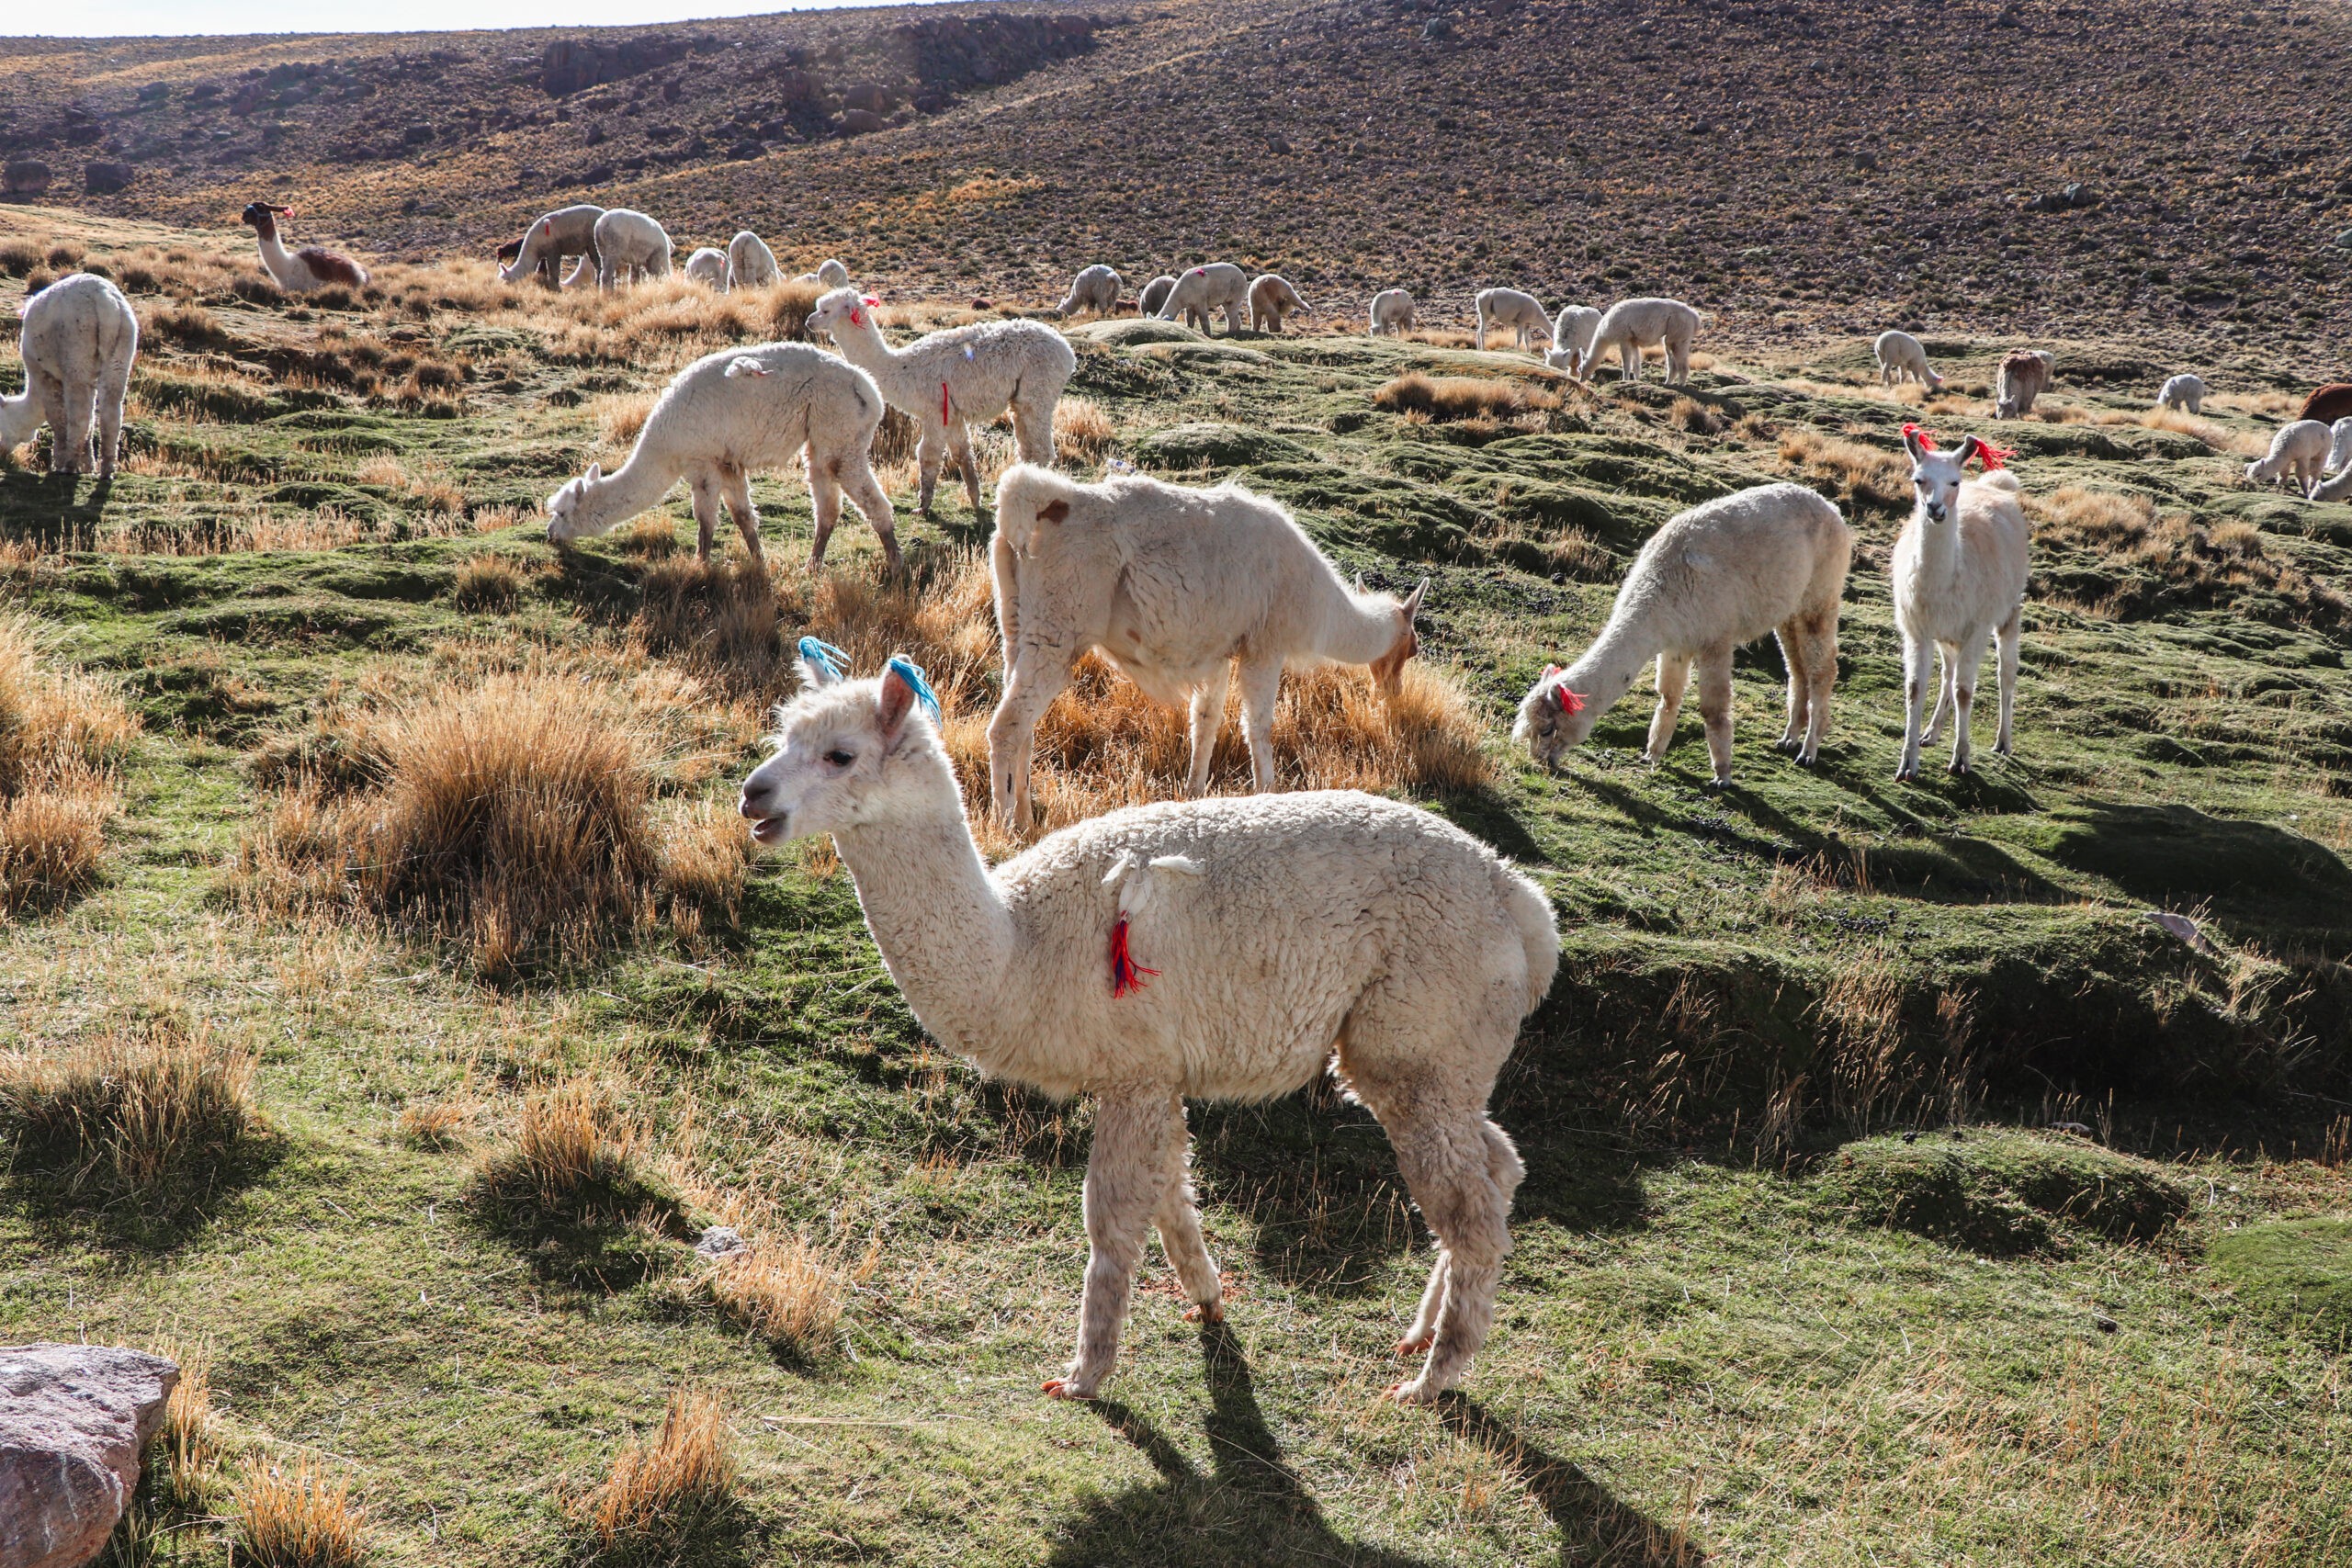 Colca Canyon Guide: Llamas and alpacas in the national reserve